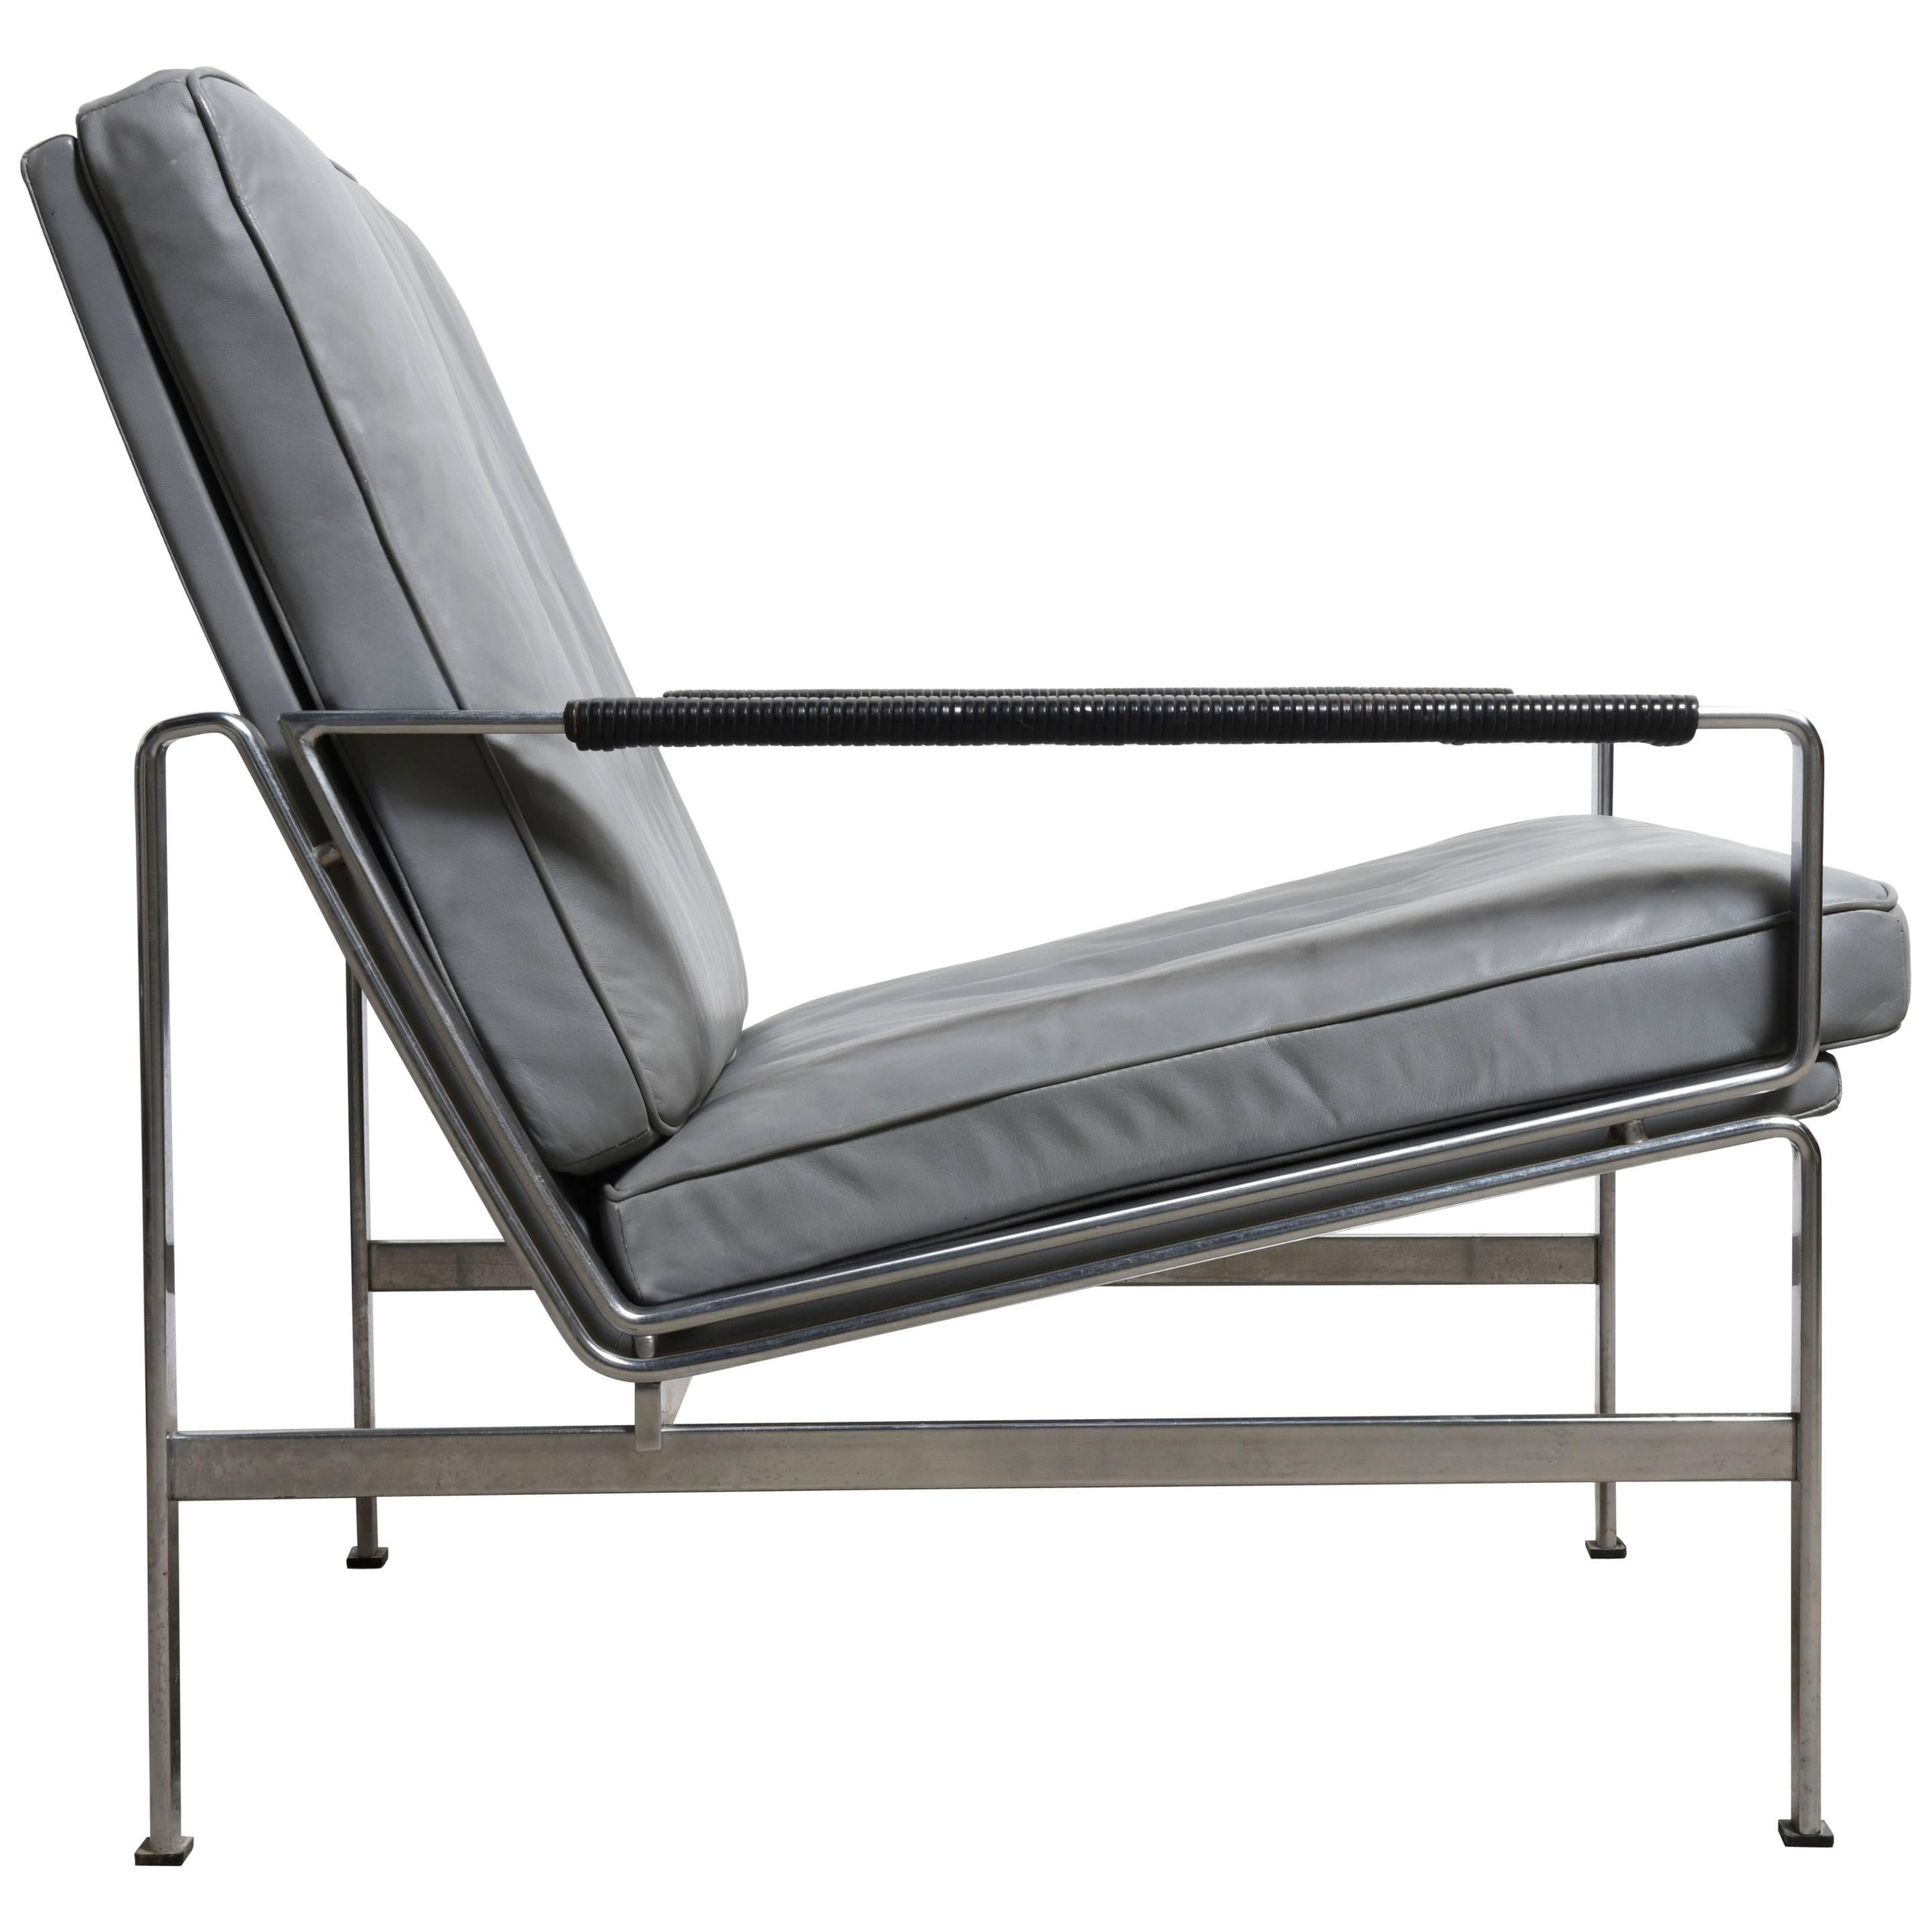 FK 6720 Classics of Midcentury Modernism Lounge Chair by Fabricius and Kastholm For Sale